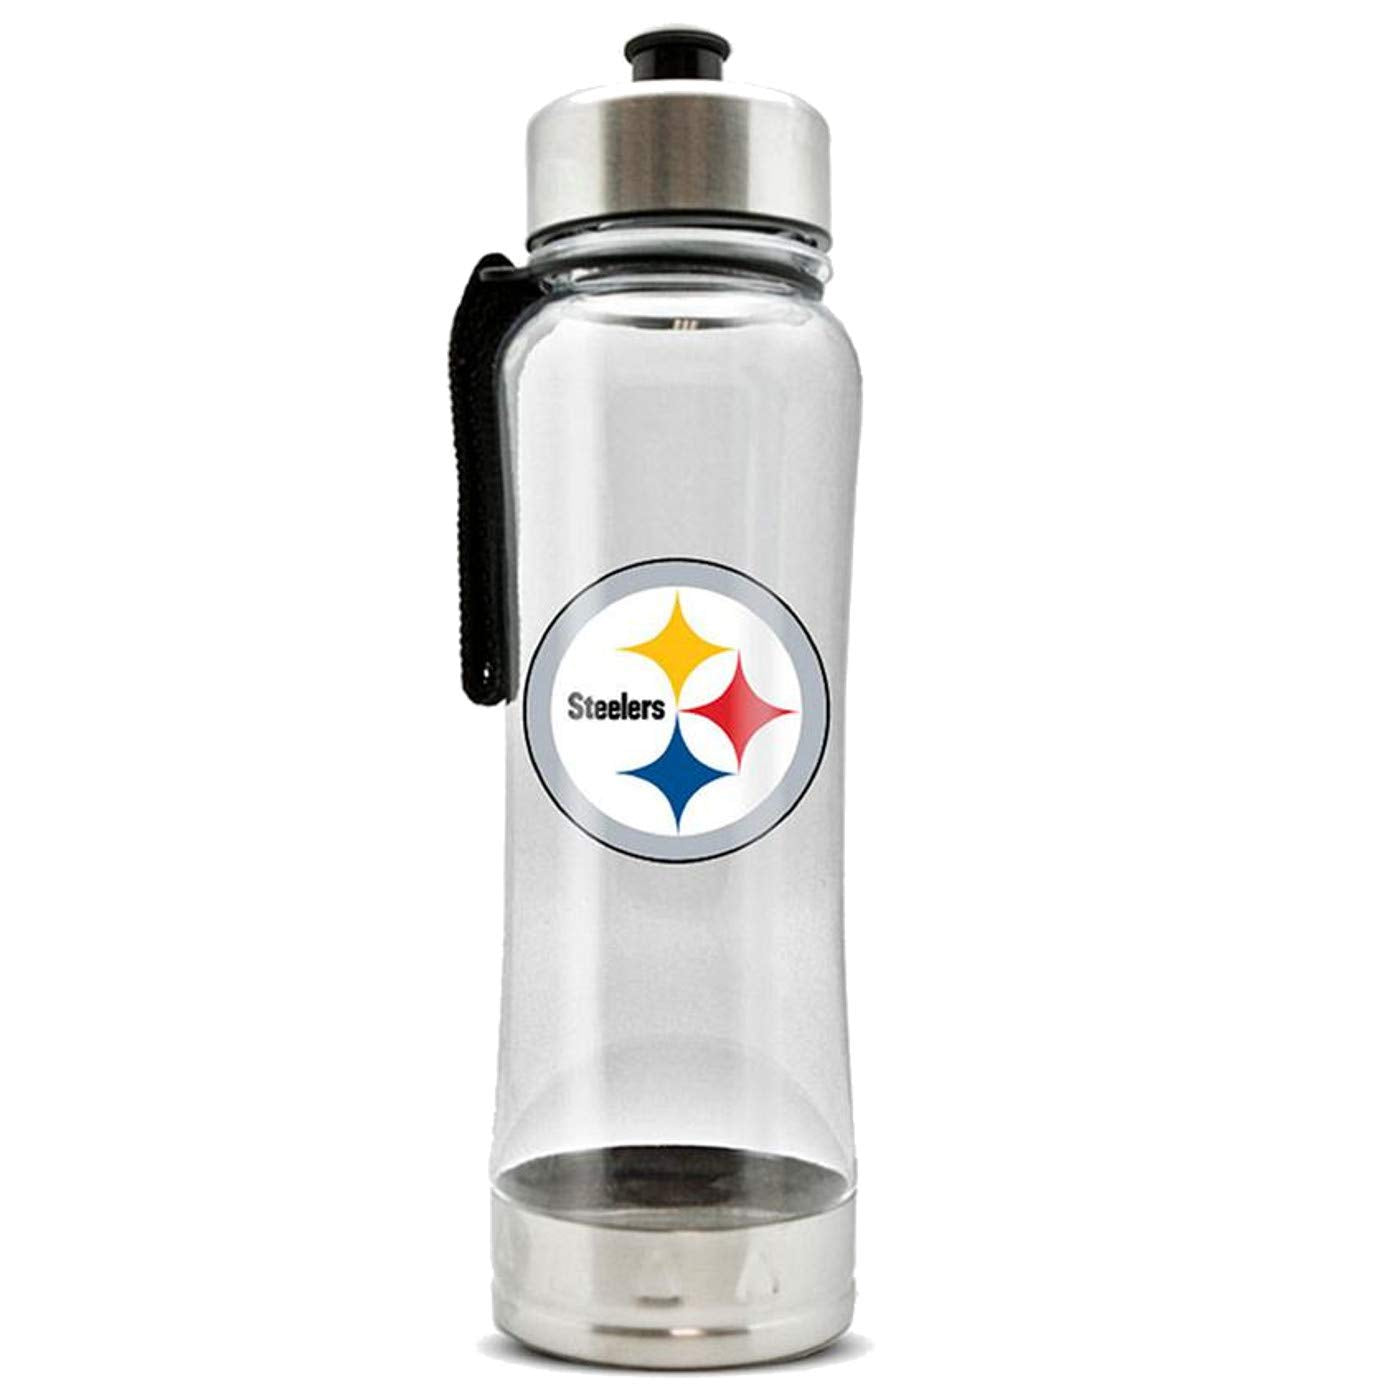 Duck House Official National Football League Fan Shop Authentic 2-Pack NFL Stainless Steel and Clear Clip-On 20oz Stainless Steel Water Bottle Bundle